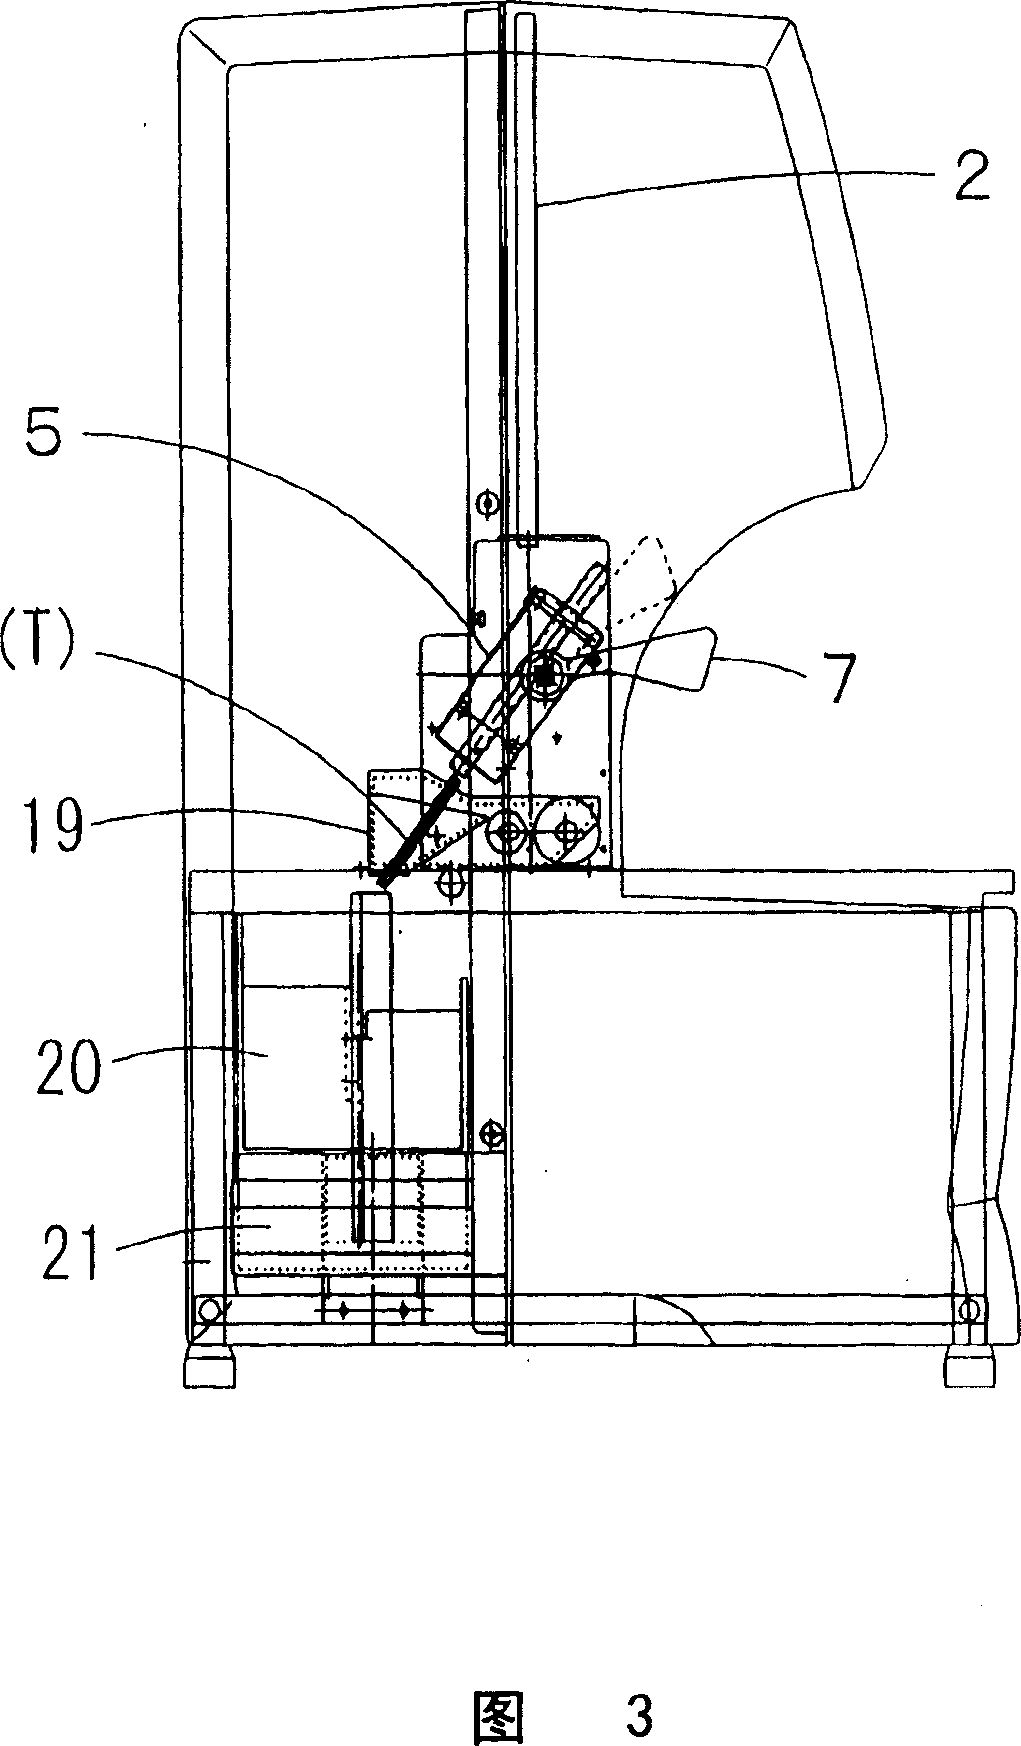 An apparatus for discharging a residual part of a resin tube in an automatic bookbinding machine